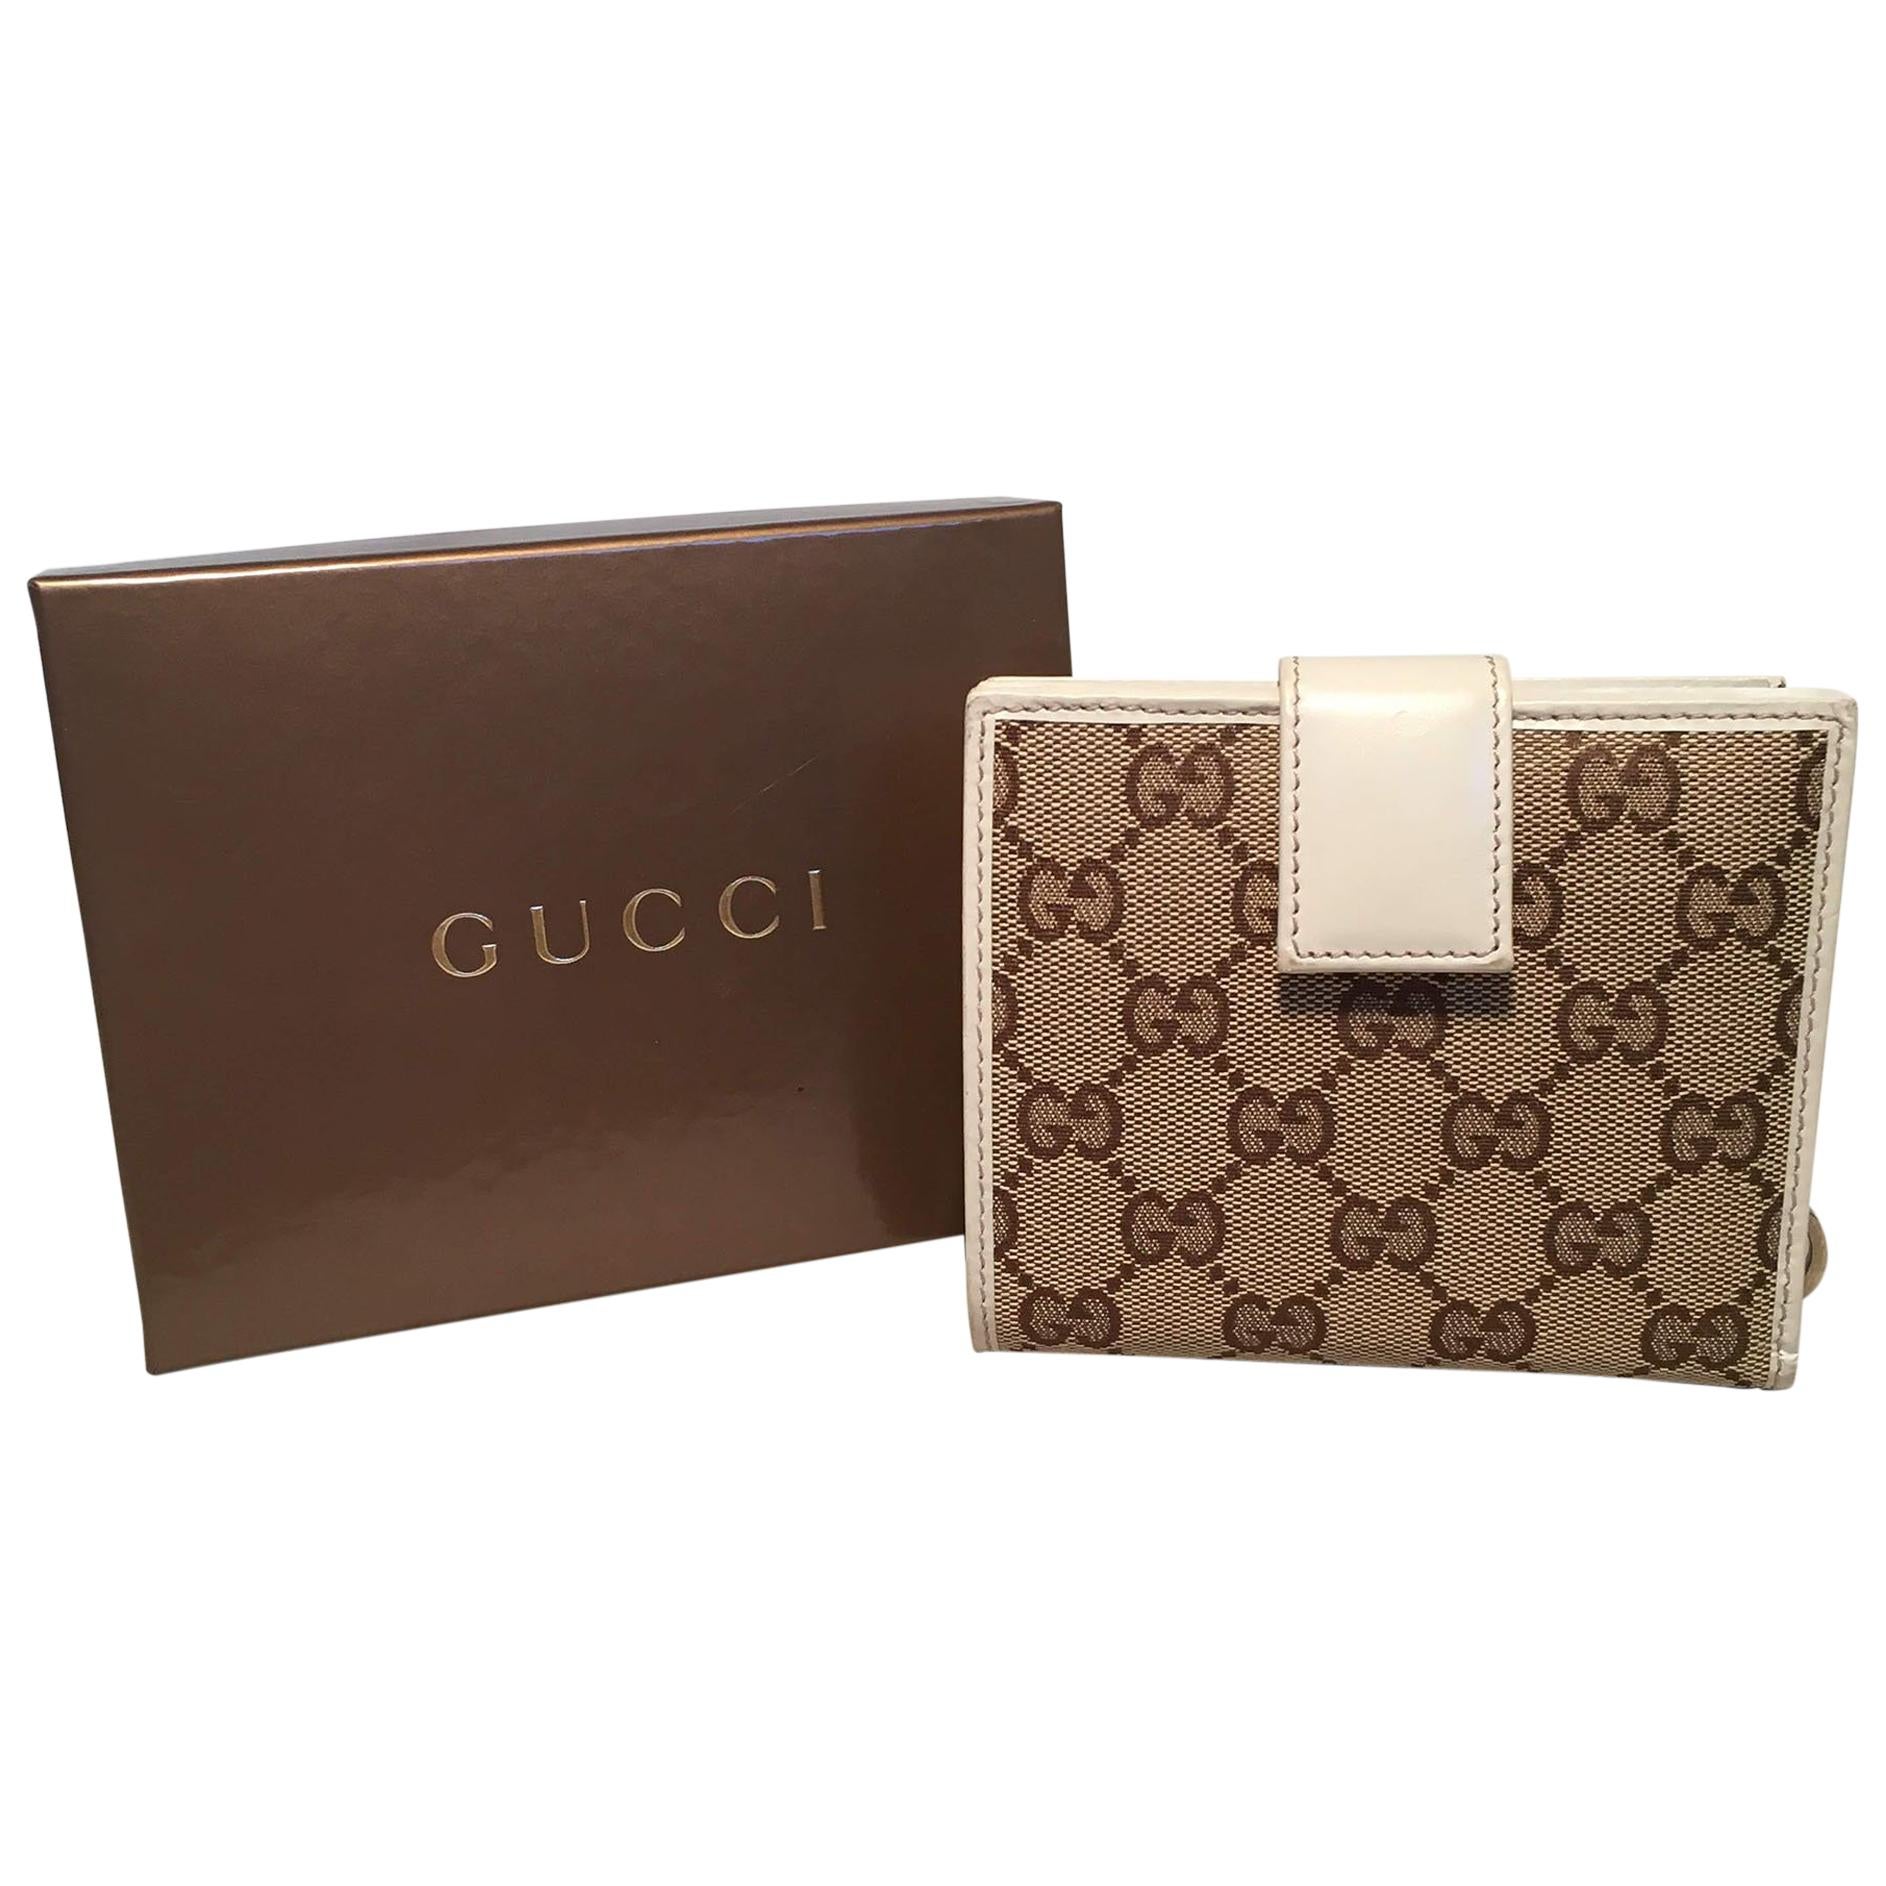 Gucci GG Monogram and Beige Leather Wallet with Zip Pocket and Box